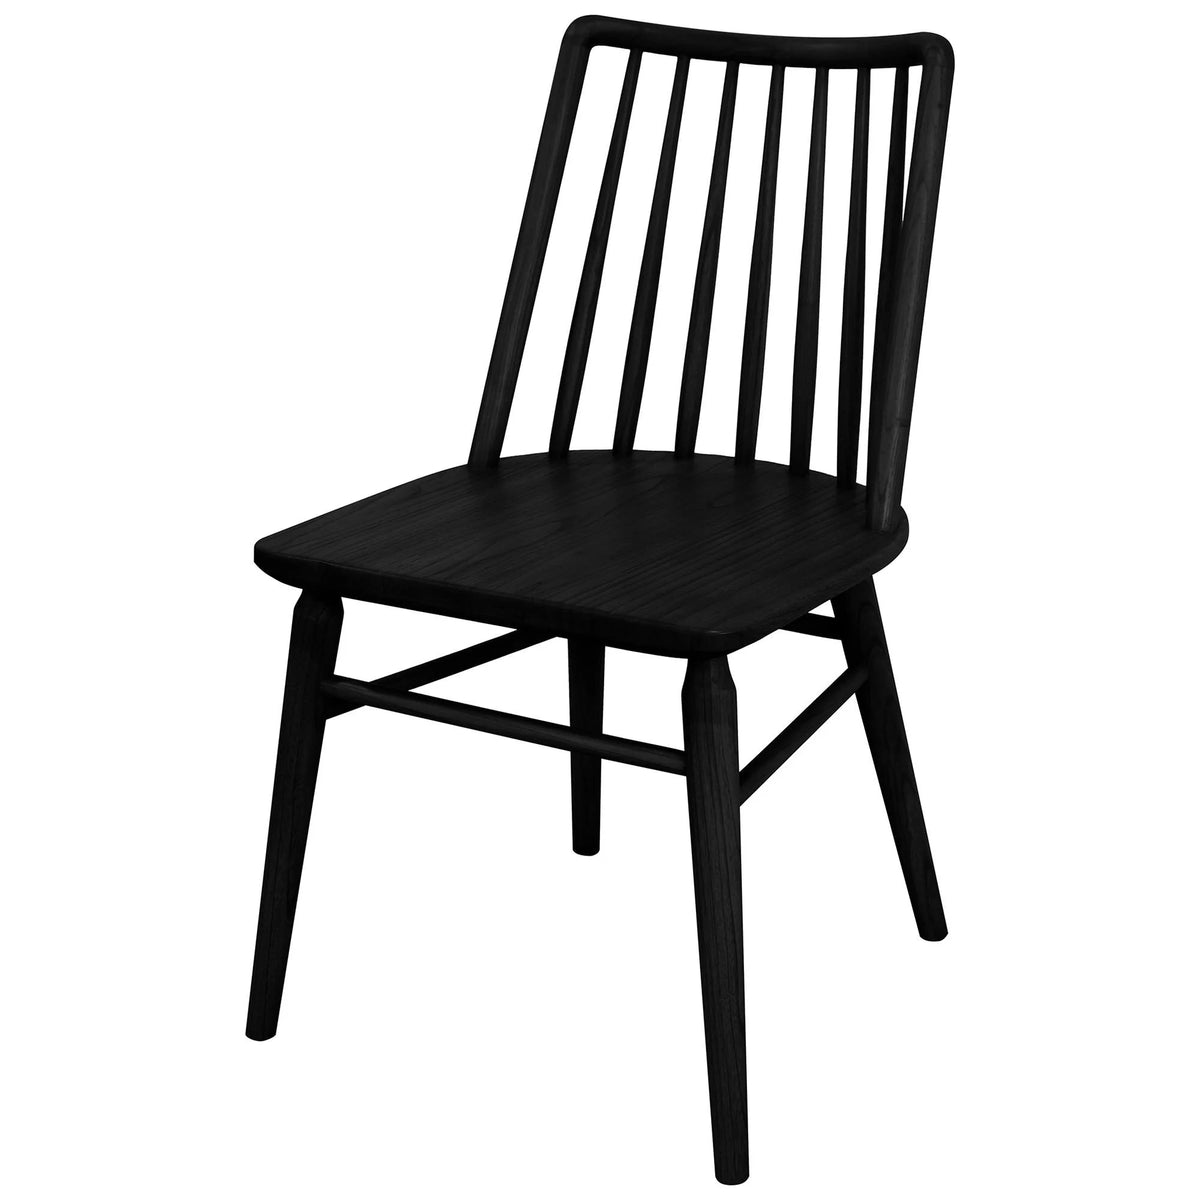 Set of 2 Riviera Solid Oak Dining Chair - Black